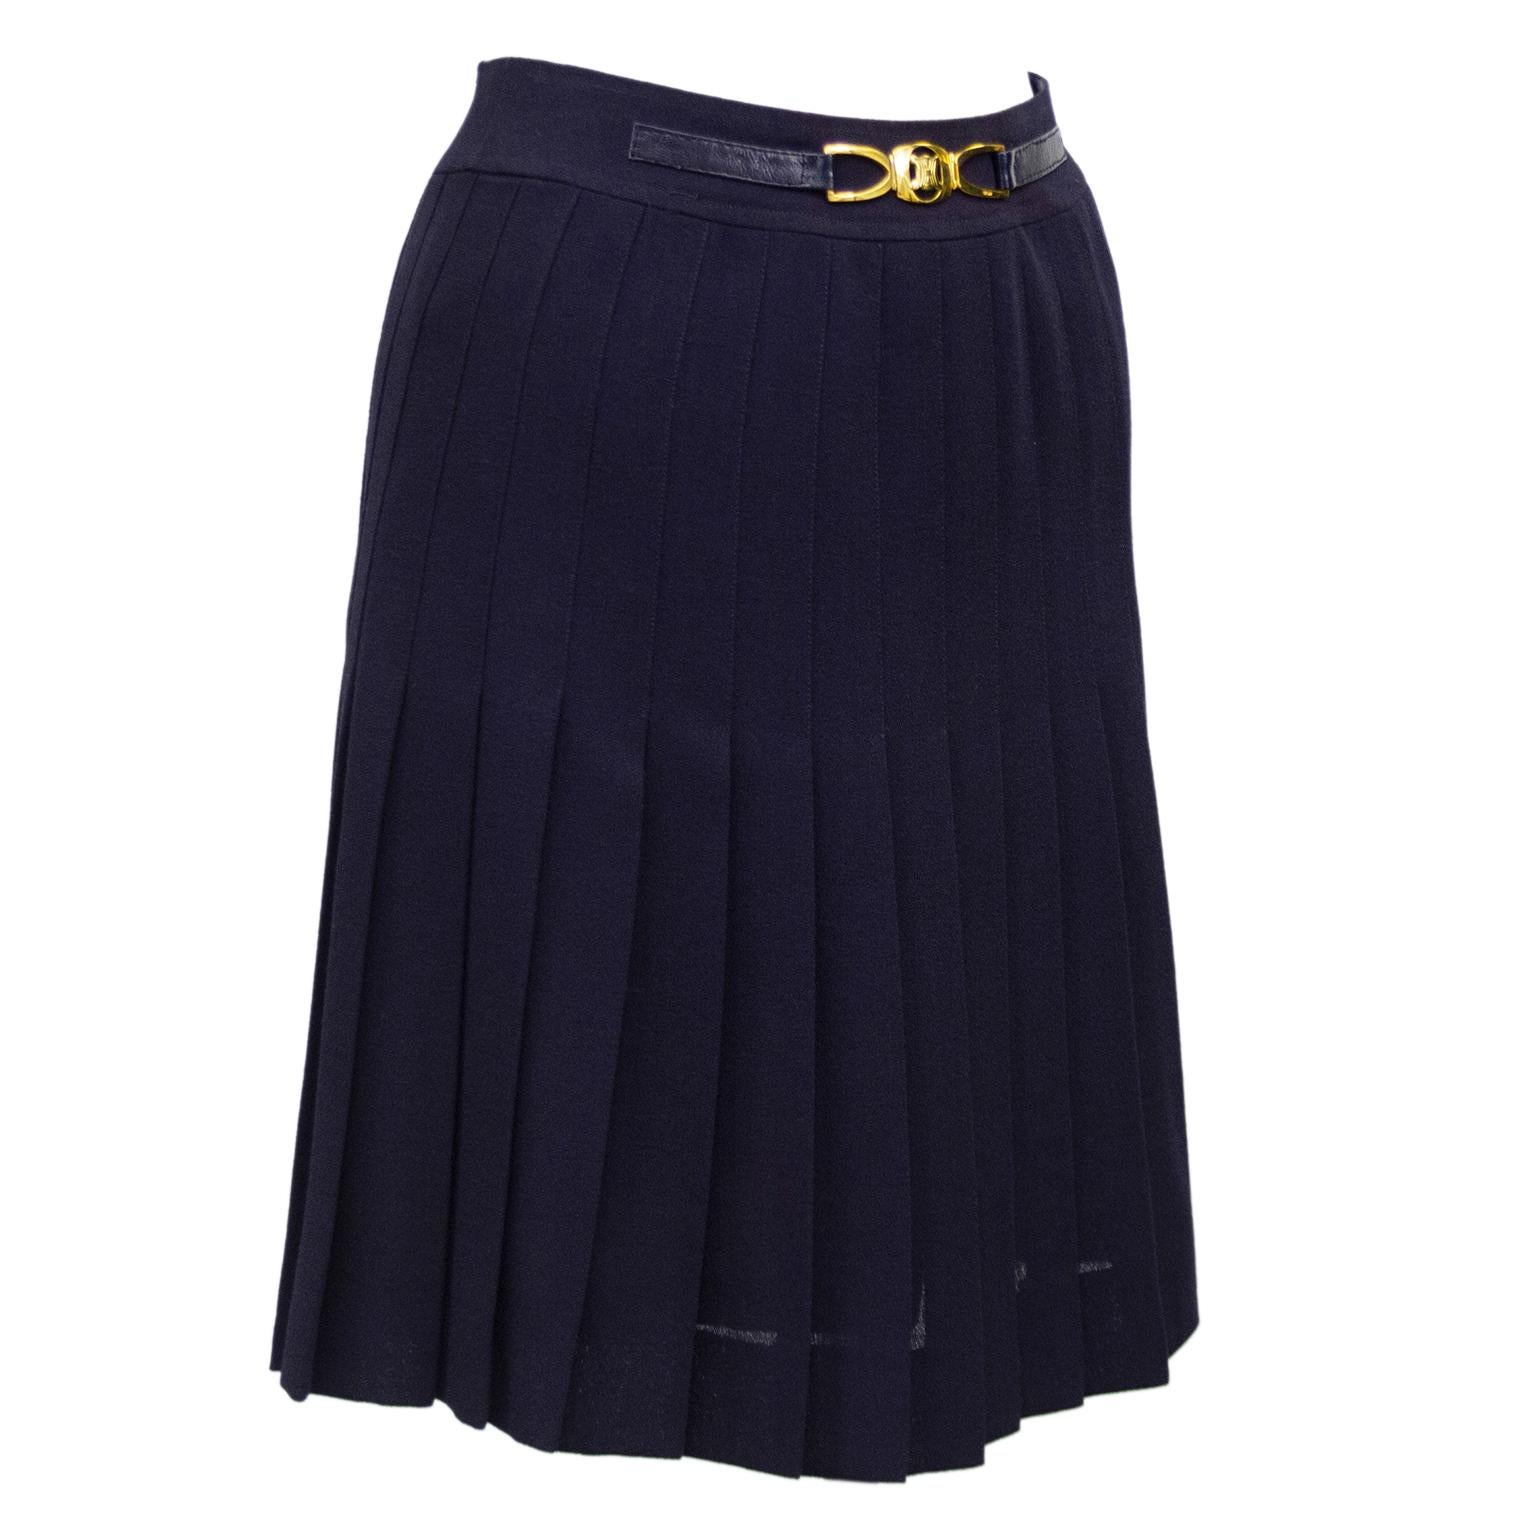 1970's classic Celine navy blue polyester and wool blend pleated skirt with half navy leather and gold belt at waistband. Overall A line shape. In excellent condition, back zipper with hook and eye. Fits like a US size 2. Made in France. Iconic